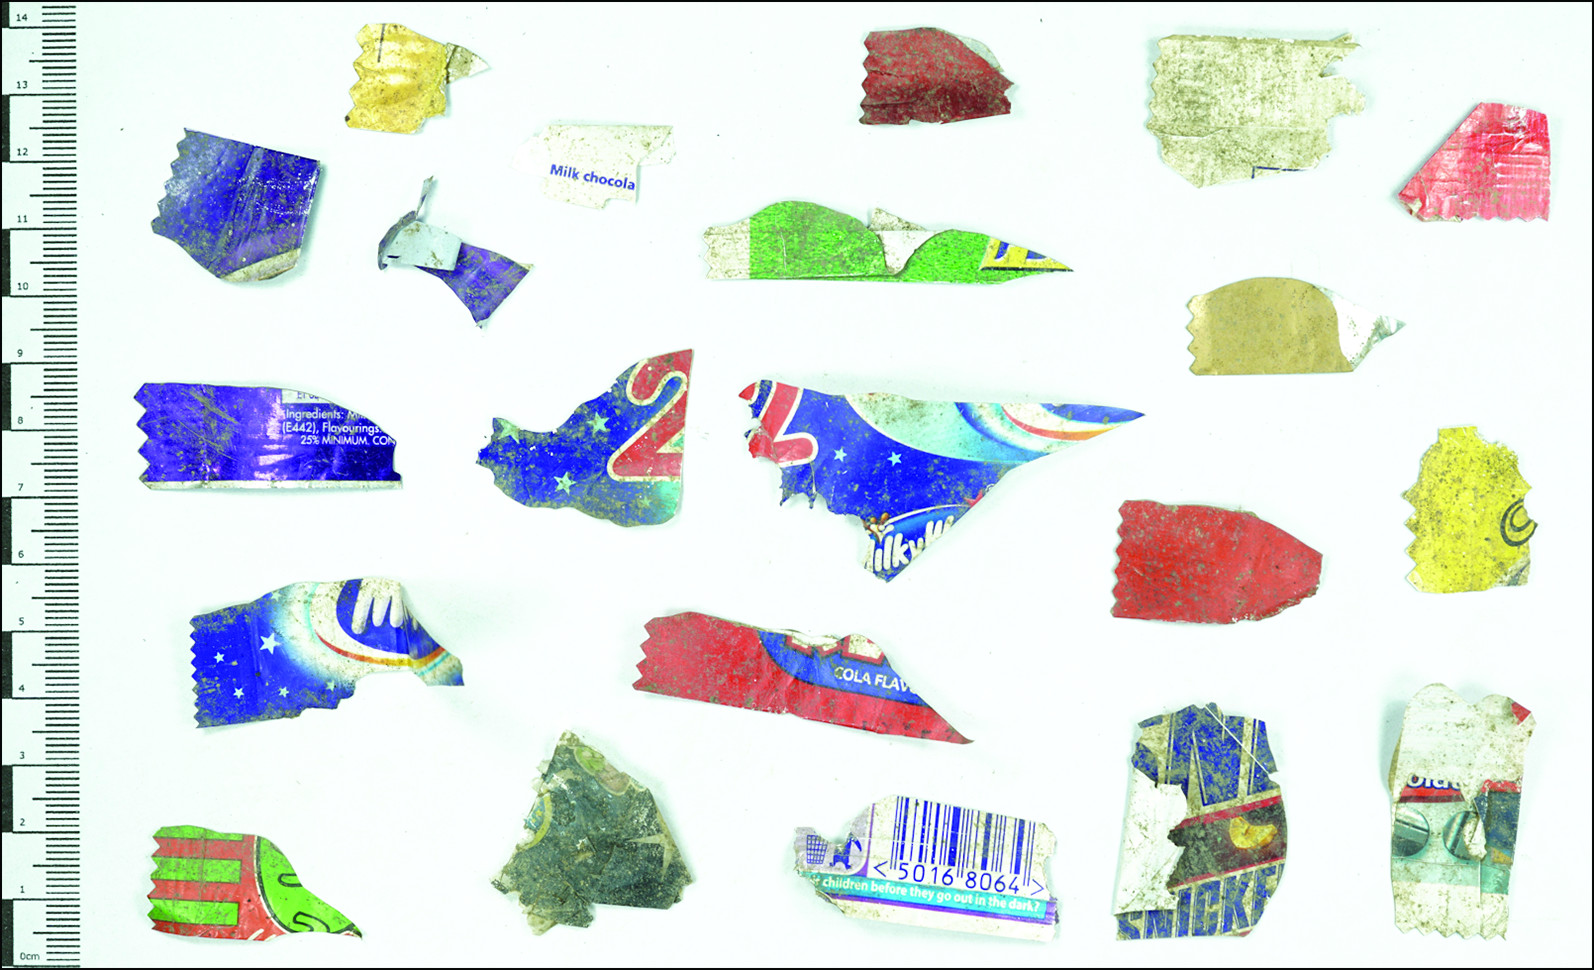 Fragments of candy wrappers.  (Image: H. Mytum et al., 2021/Antiquity)